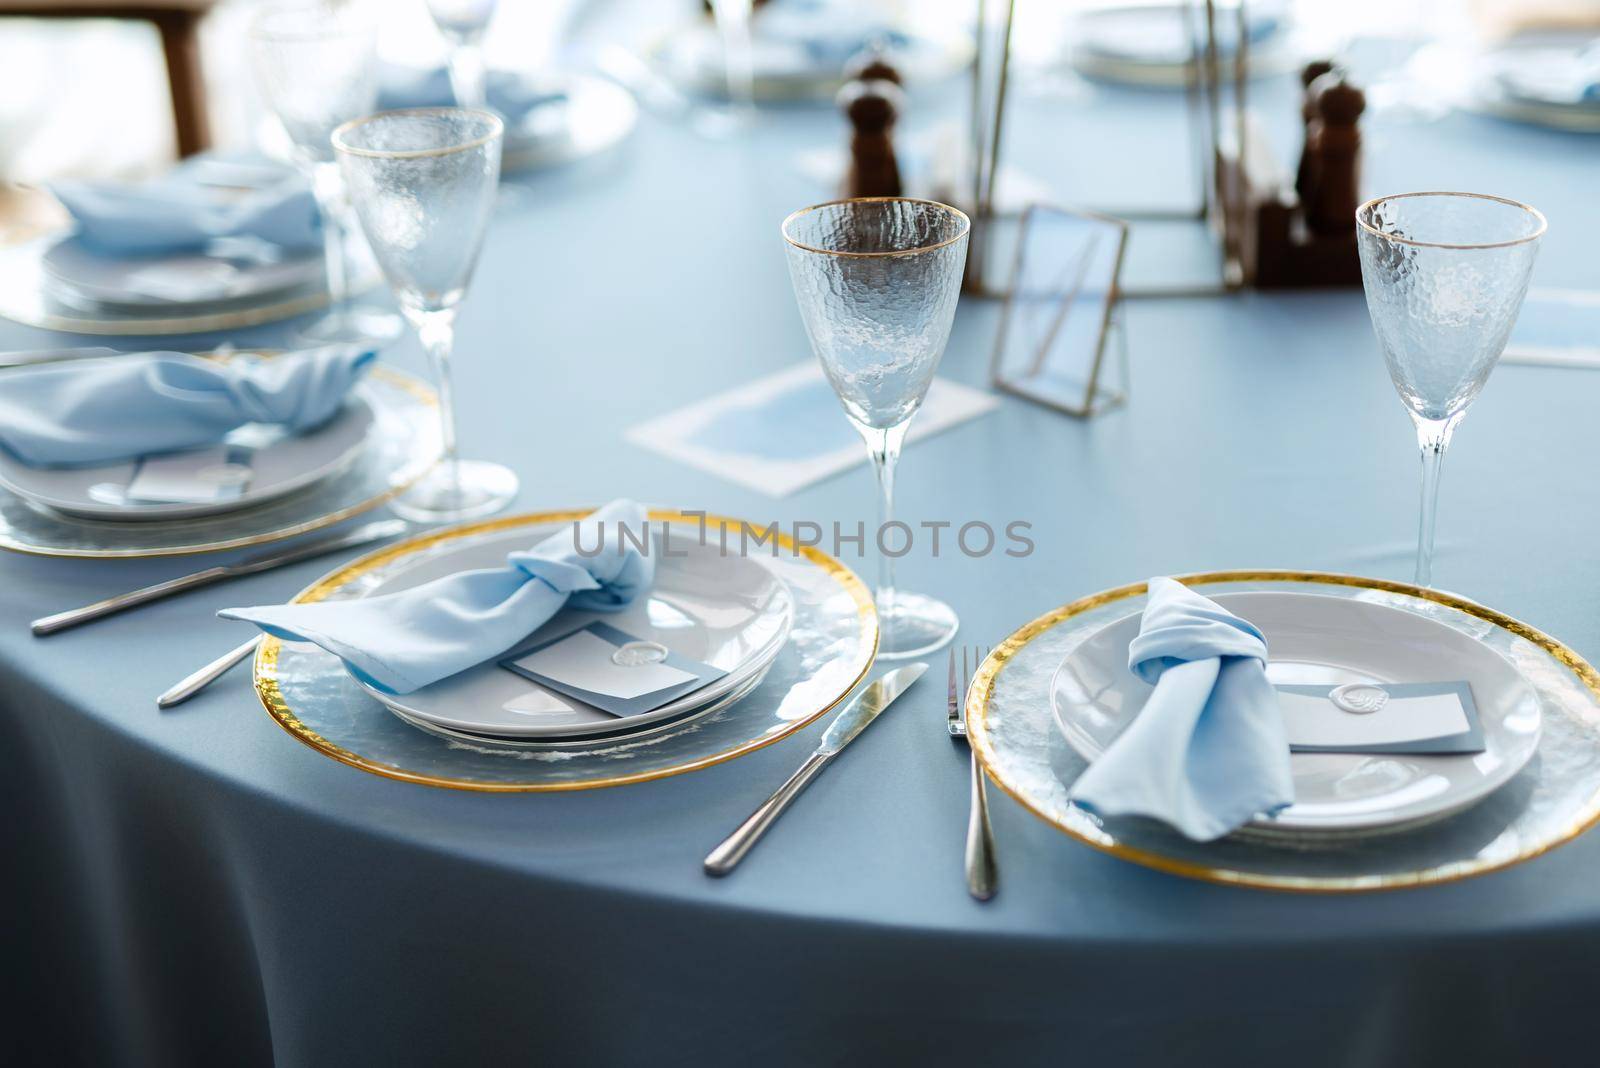 Banquet hall for weddings with decorative elements by Andreua